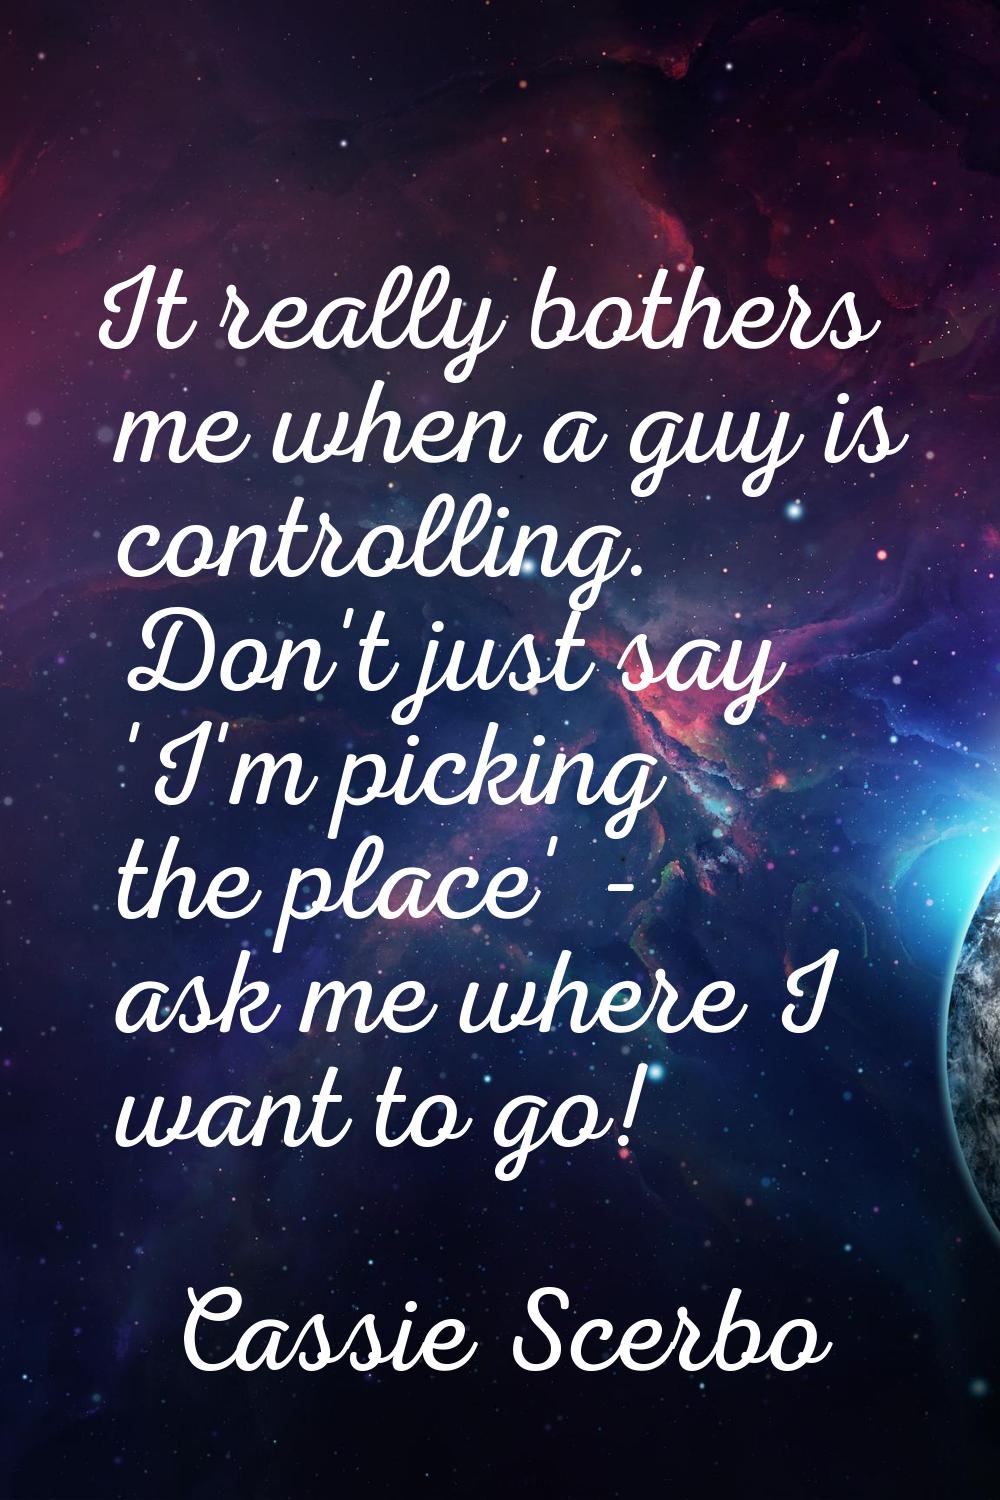 It really bothers me when a guy is controlling. Don't just say 'I'm picking the place' - ask me whe